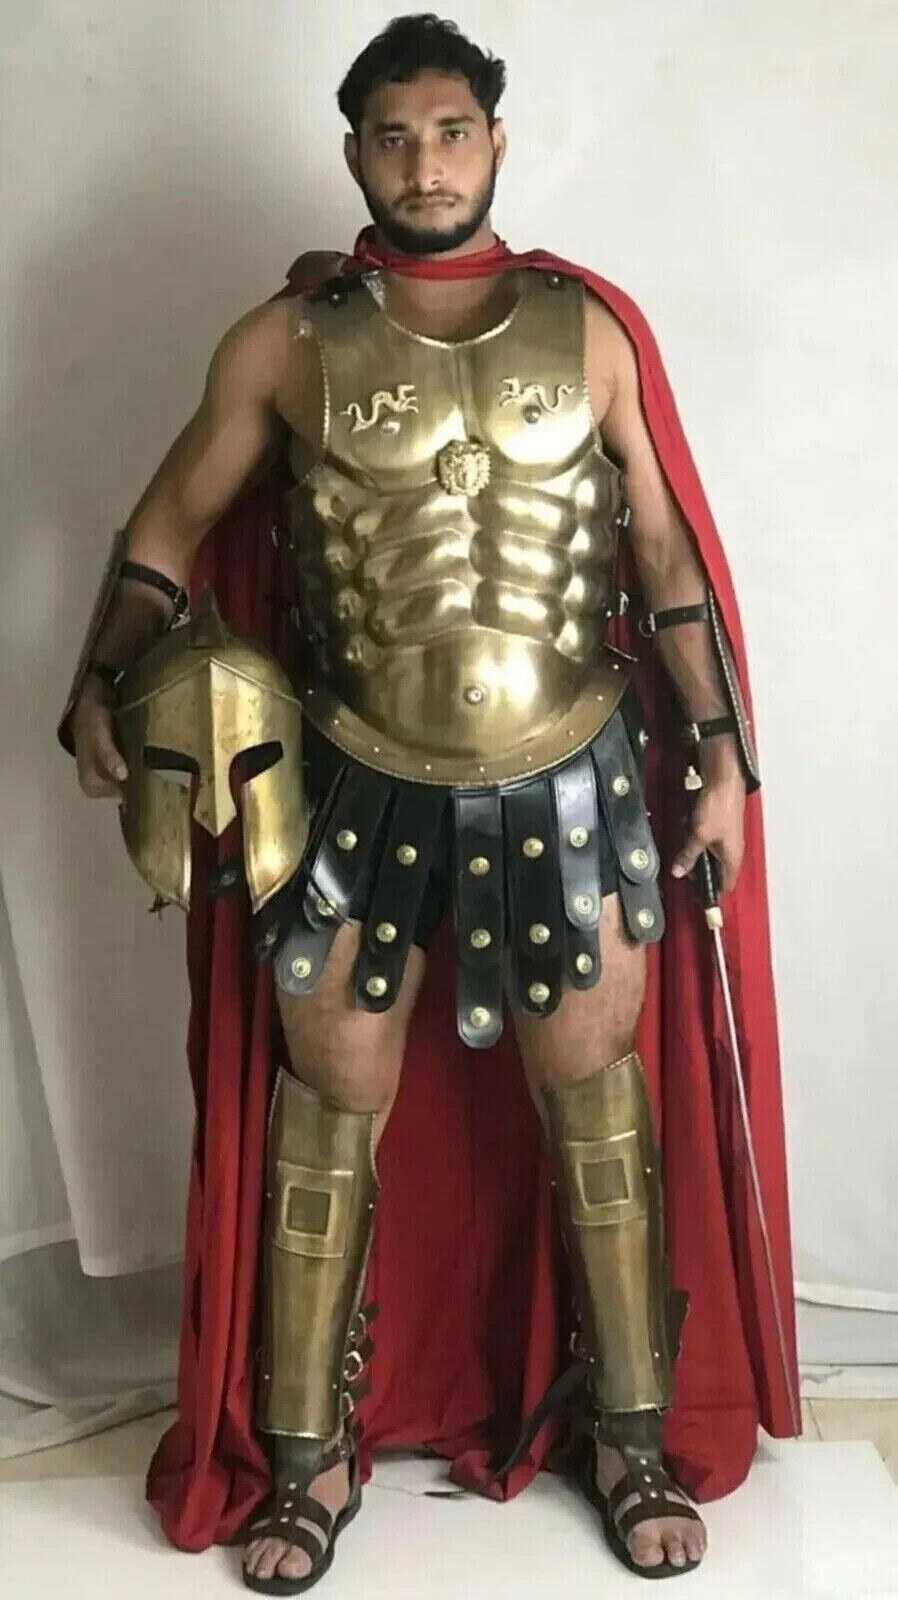 300 Movie Costume, King Spartan Costume, perfect Christmas gift collection